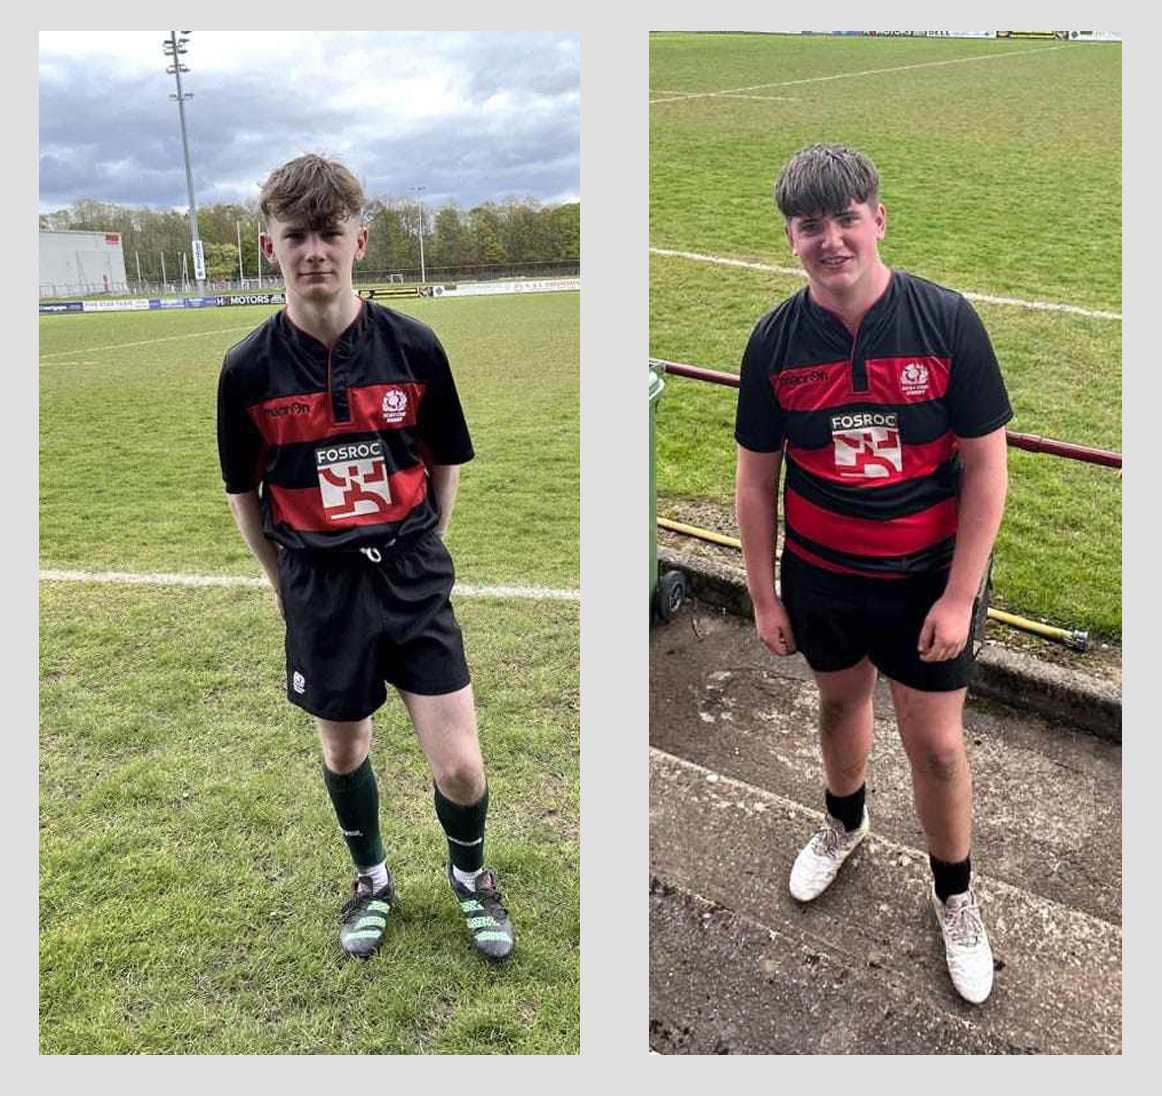 Hawick U16s duo Ciaran Cannon and Ruairidh Oliver who turned out for Edinburgh Gunners today, Sunday, winning all 3 of their games and Ciaran pitching in with a score. Well done lads 💪🏉💚 #HawickYouthRugby